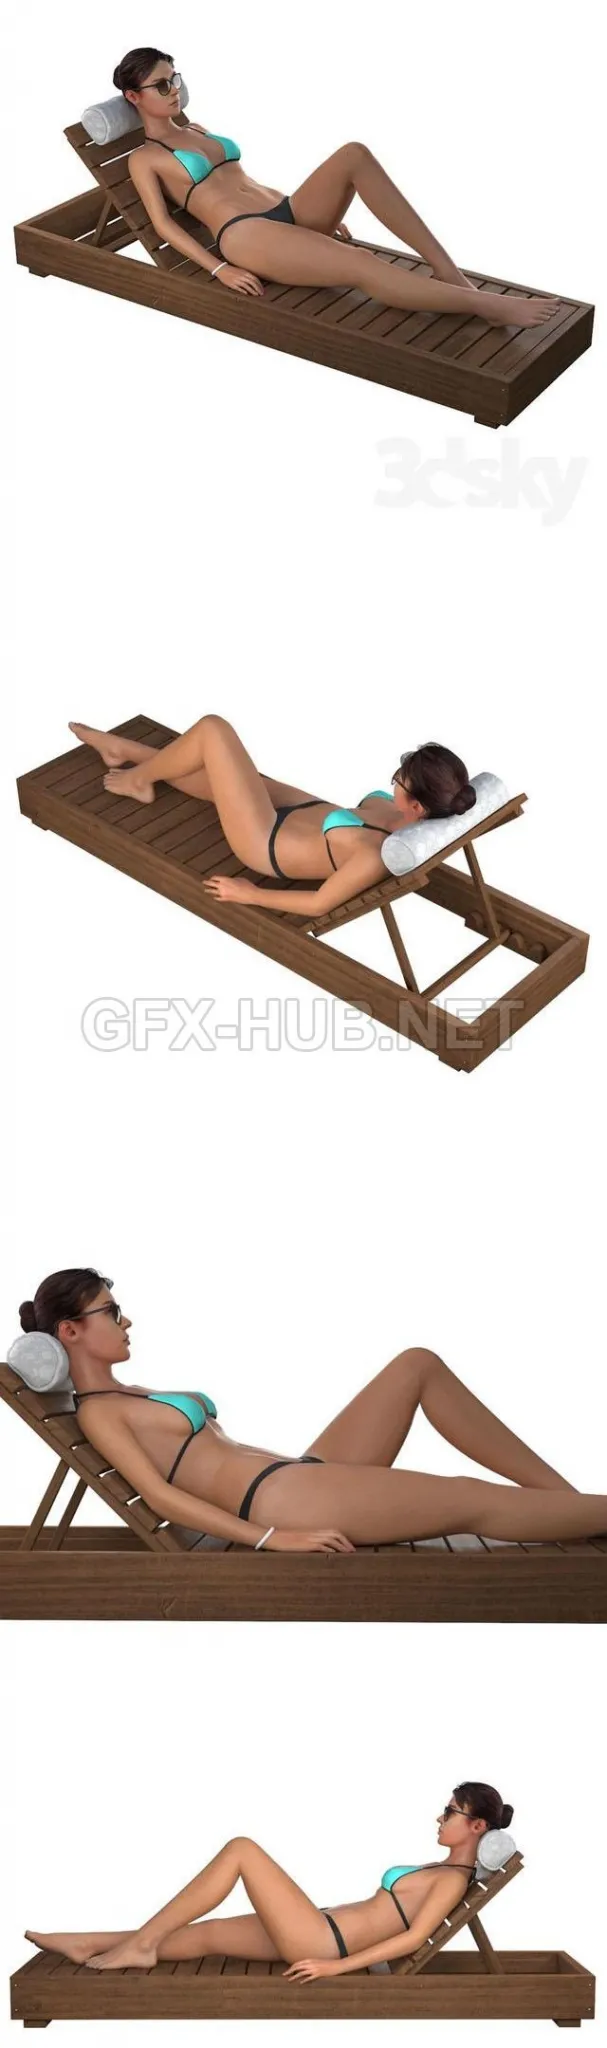 Girl on a deck-chair – 215439